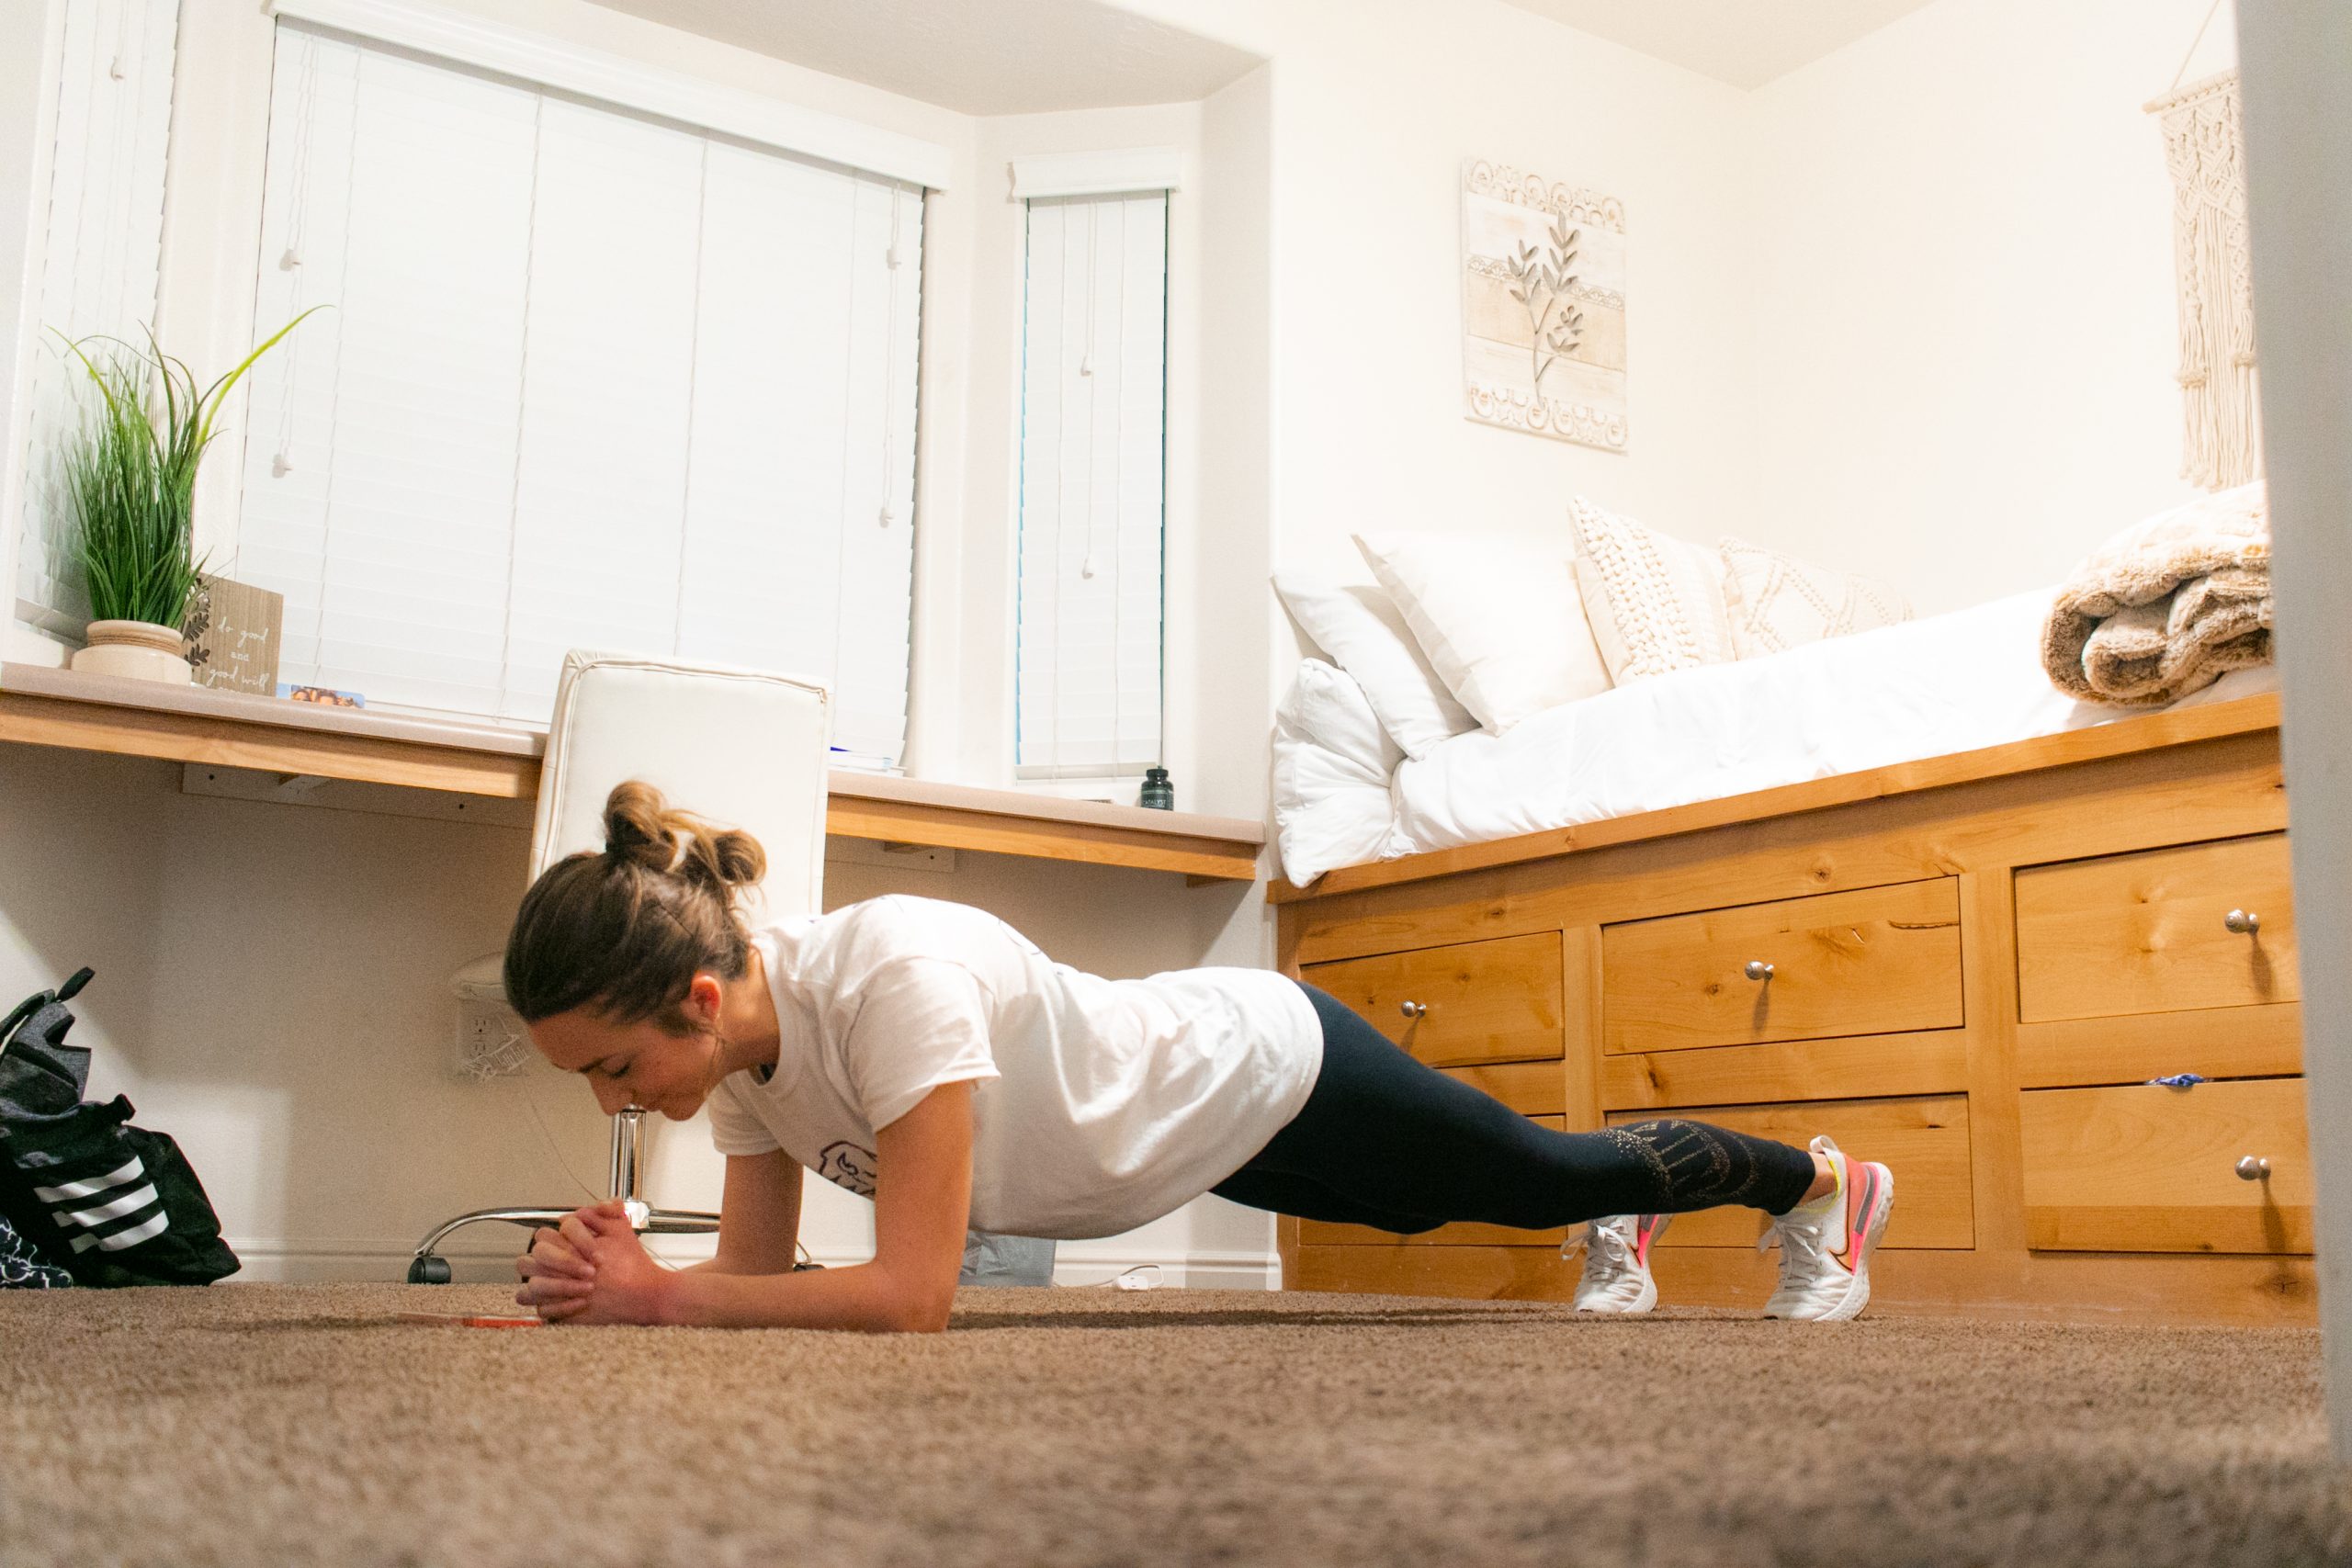 ‘The possibilities are limitless:’ 5 tips to successful home workout